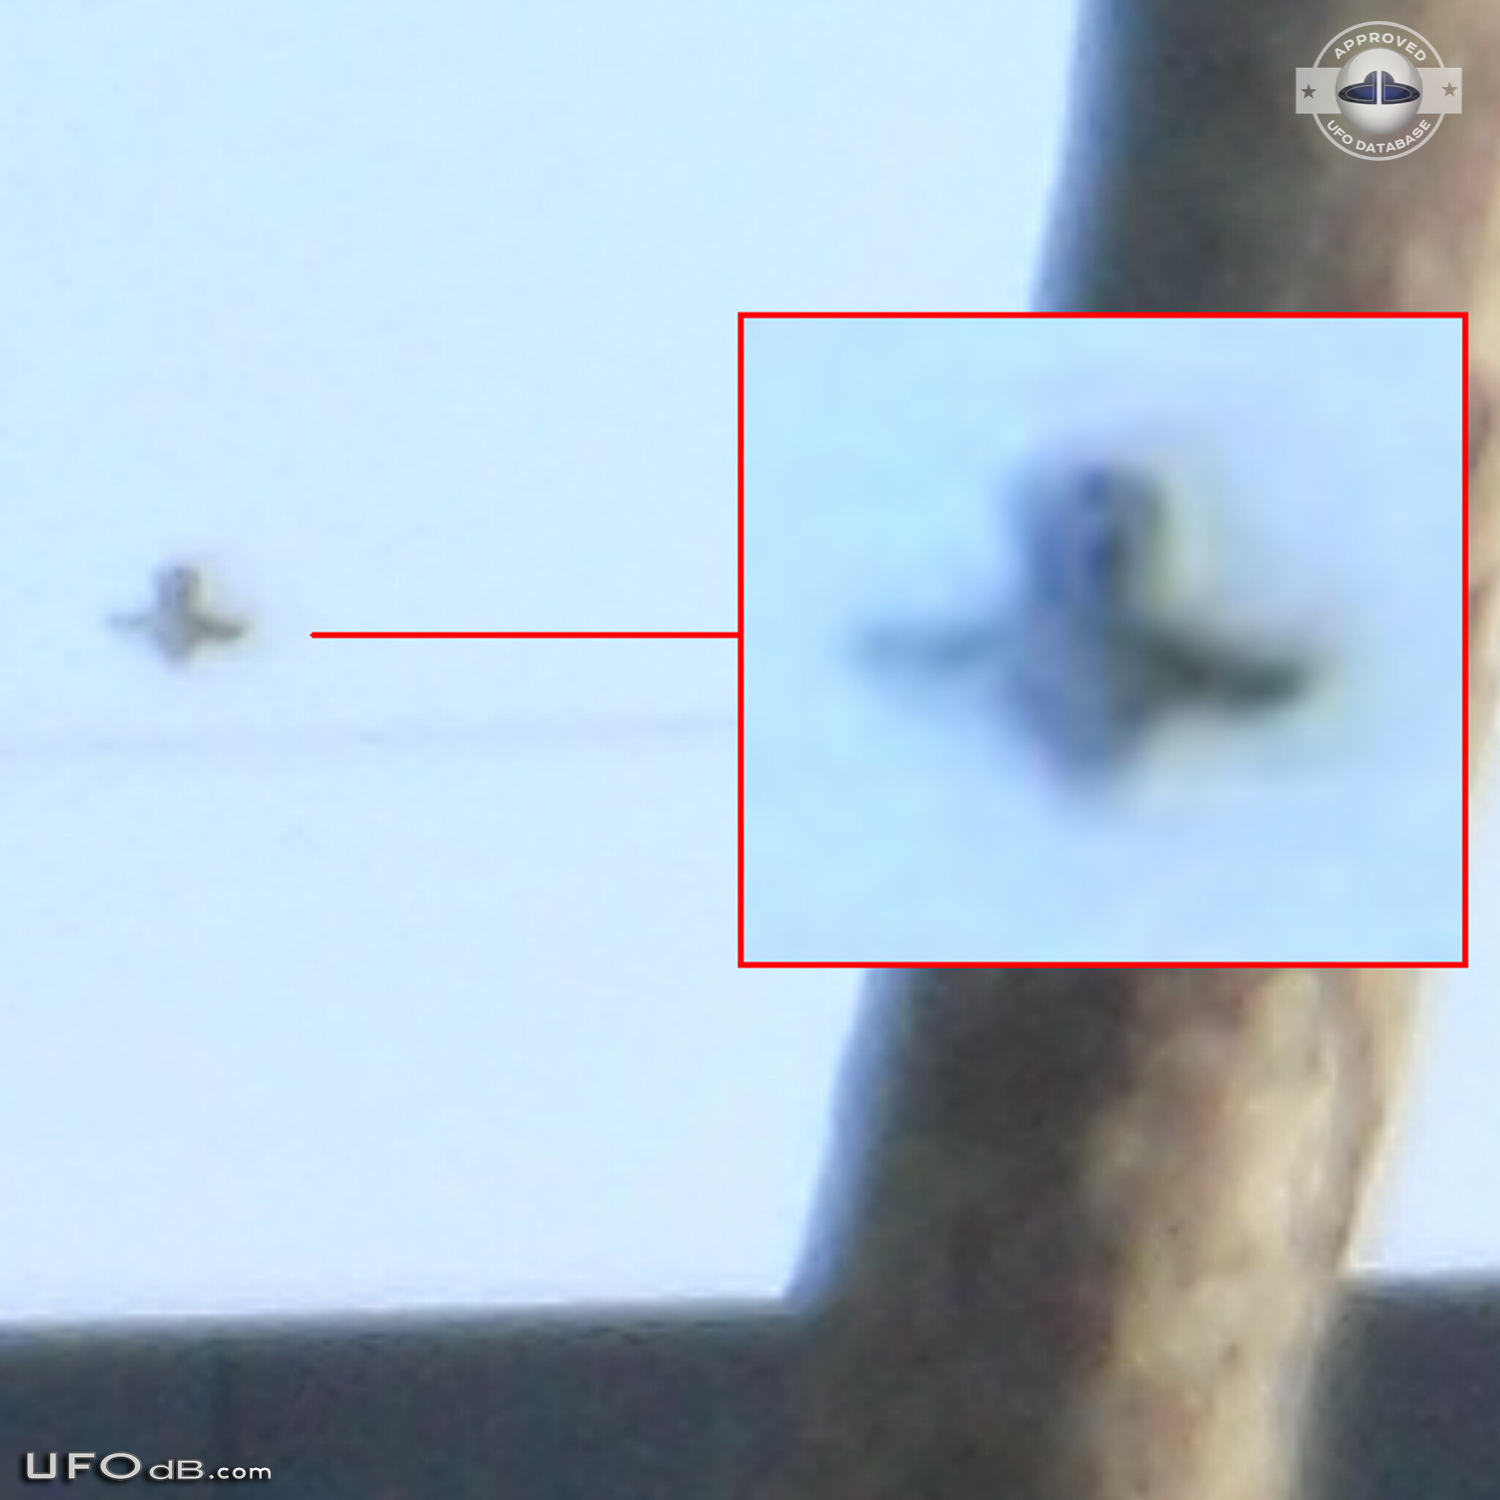 Strange Shaped UFO rarely seen caught on picture Istanbul Turkey 2014 UFO Picture #568-4